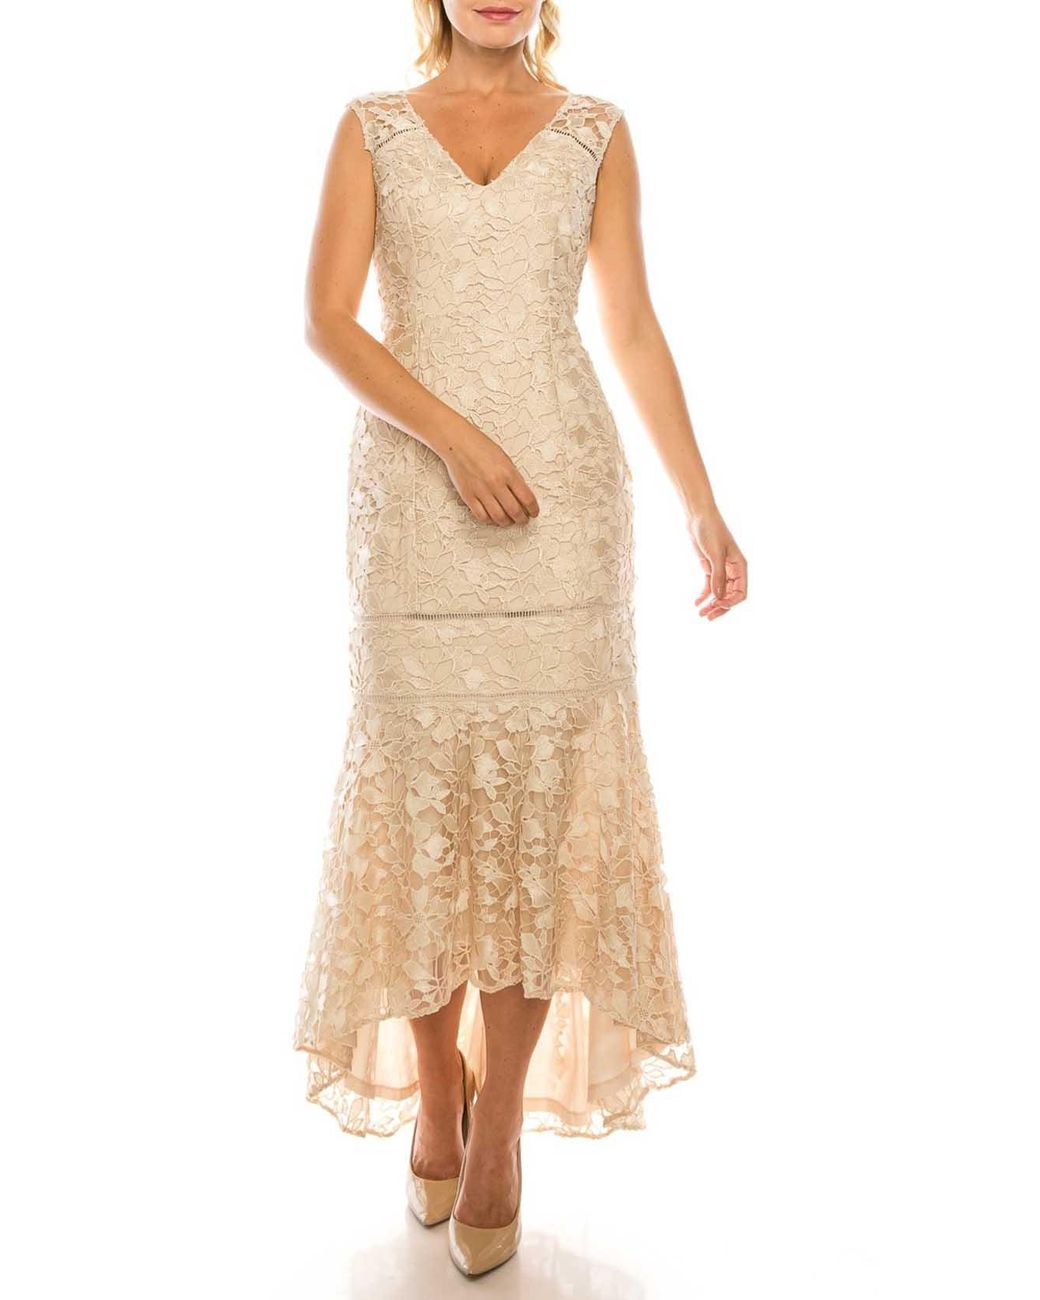 Adrianna Papell Ap1e203392 Lace V-neck Dress in Champagne 